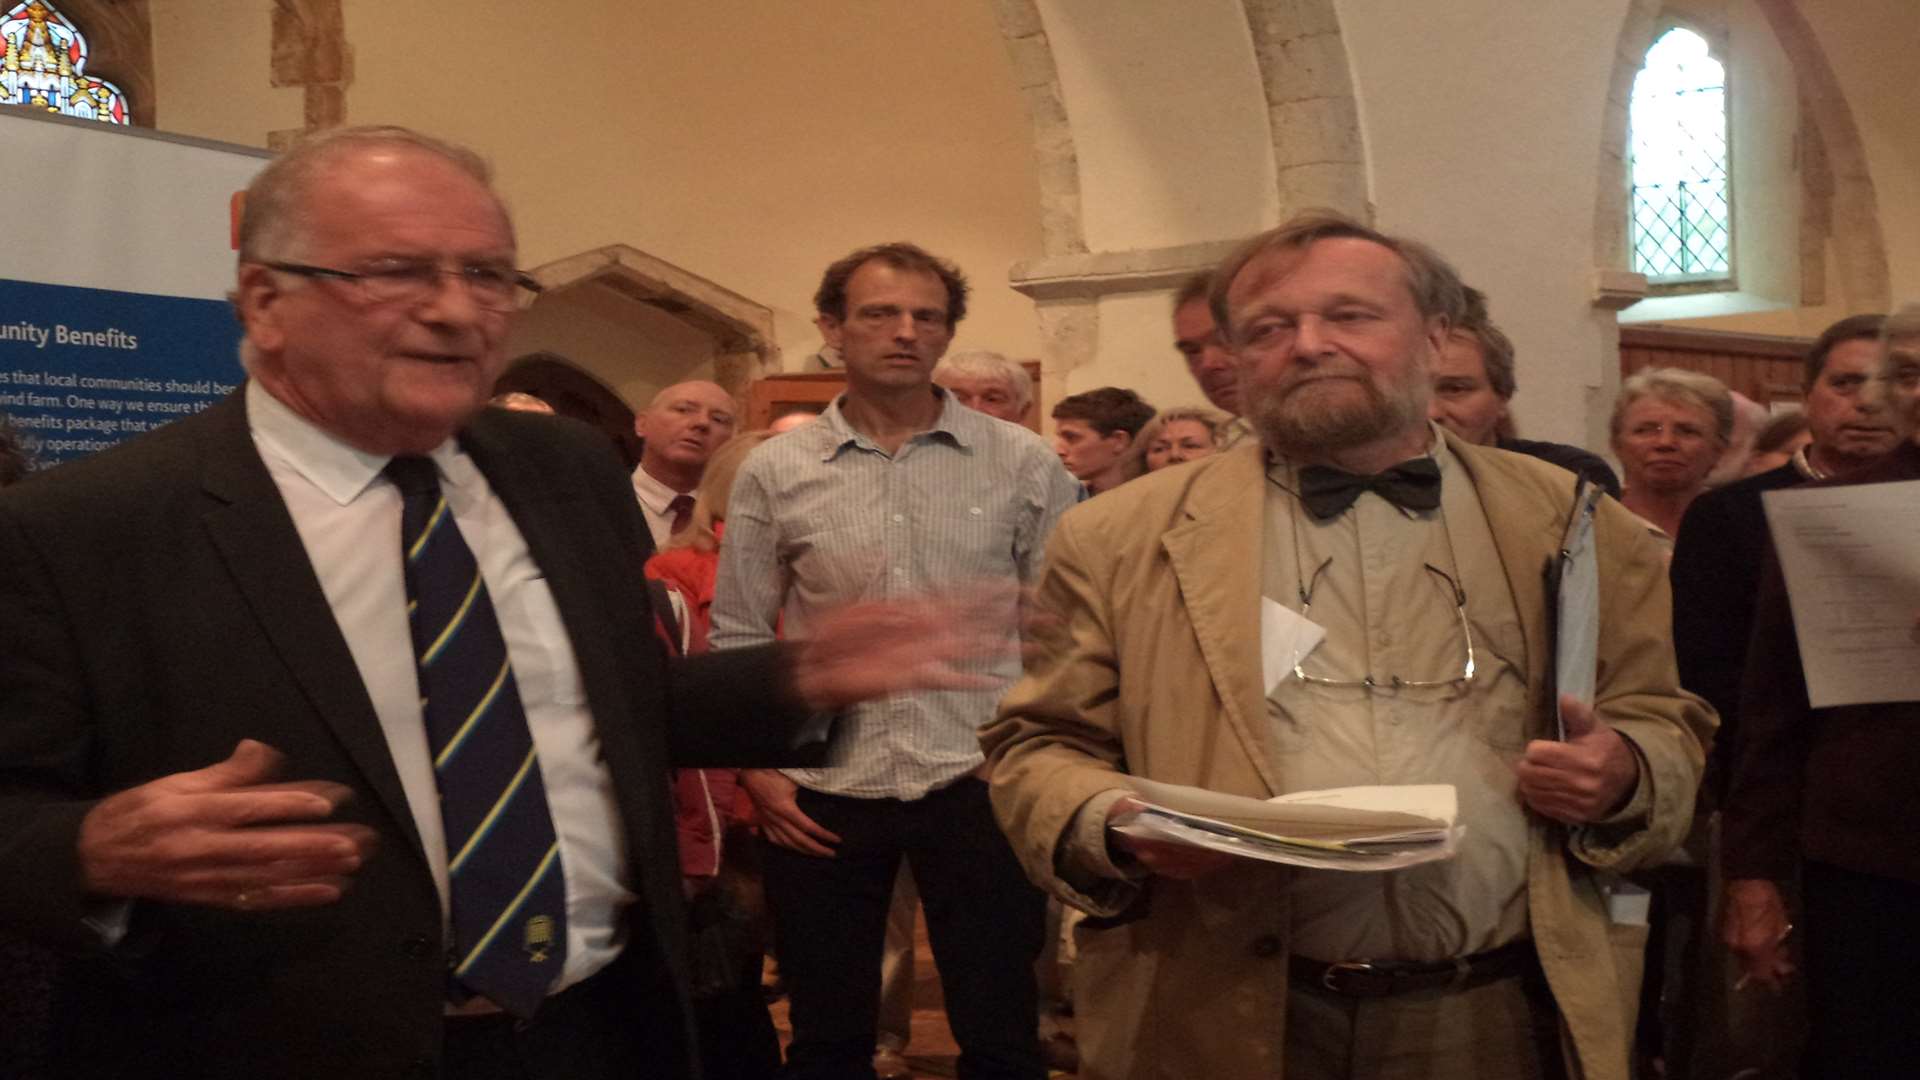 MP Sir Roger Gale and Dr Ashley Lupin are opposed to the plans